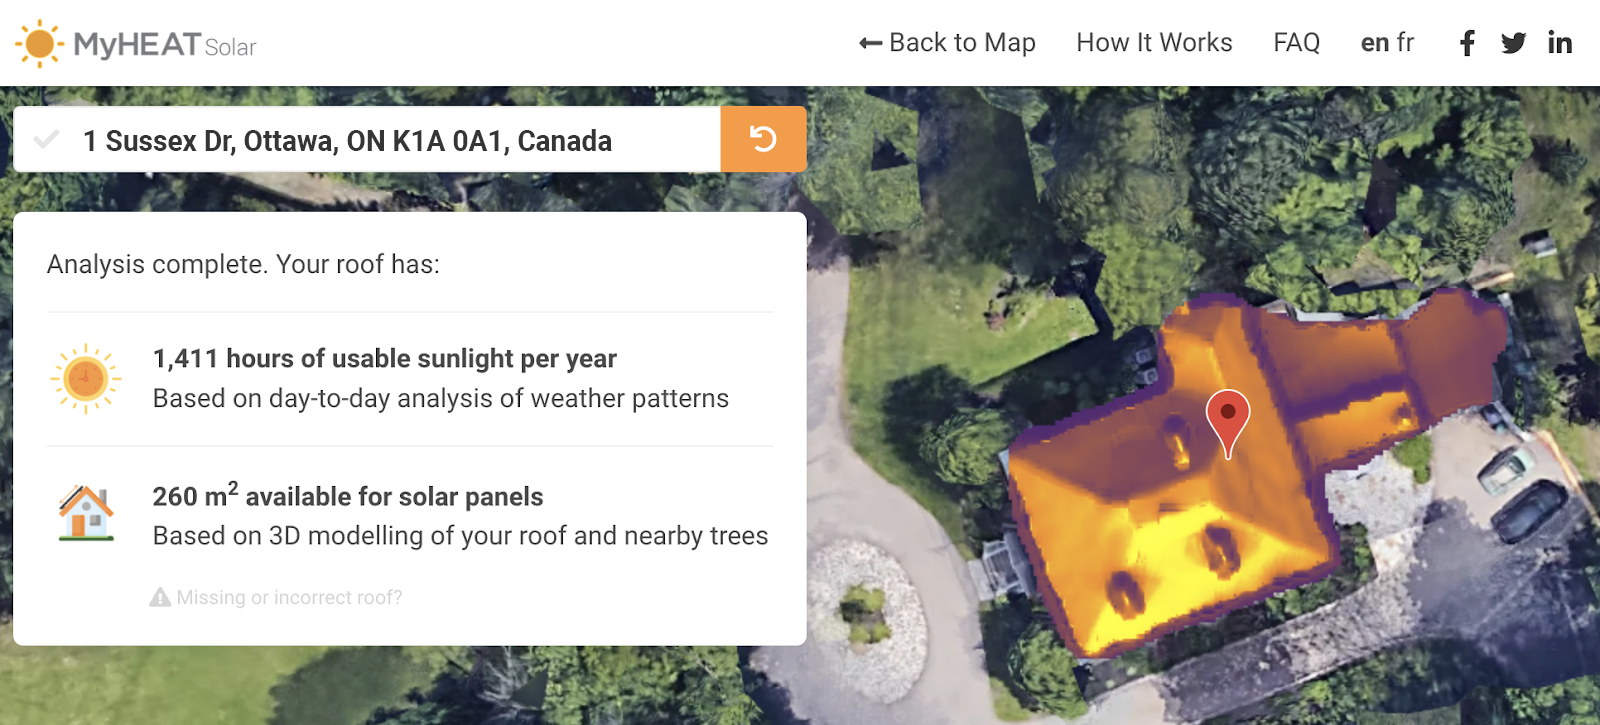 A solar map showing how much sun the roof of Rideau Cottage building gets at 1 Sussex Dr, Ottawa, Ontario